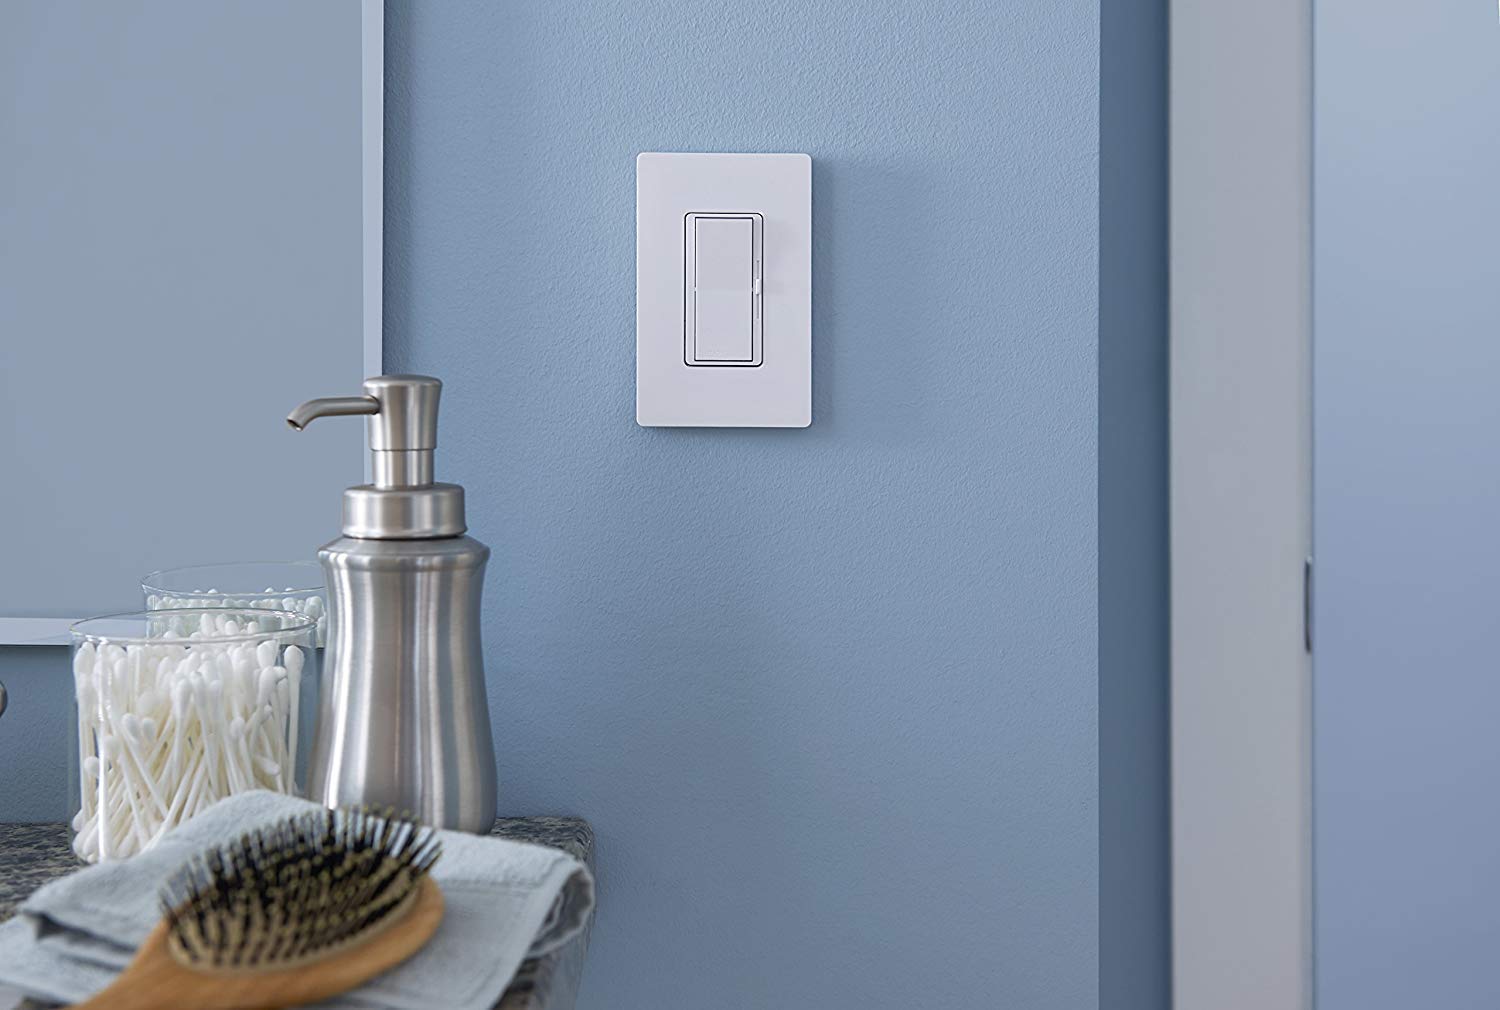 Lutron DVCL-153PH-WHC Diva C.L Dimmer Switch for Dimmable LED, Halogen and Incandescent Bulbs, with Wallplate, Single-Pole or 3-Way - Consavvy